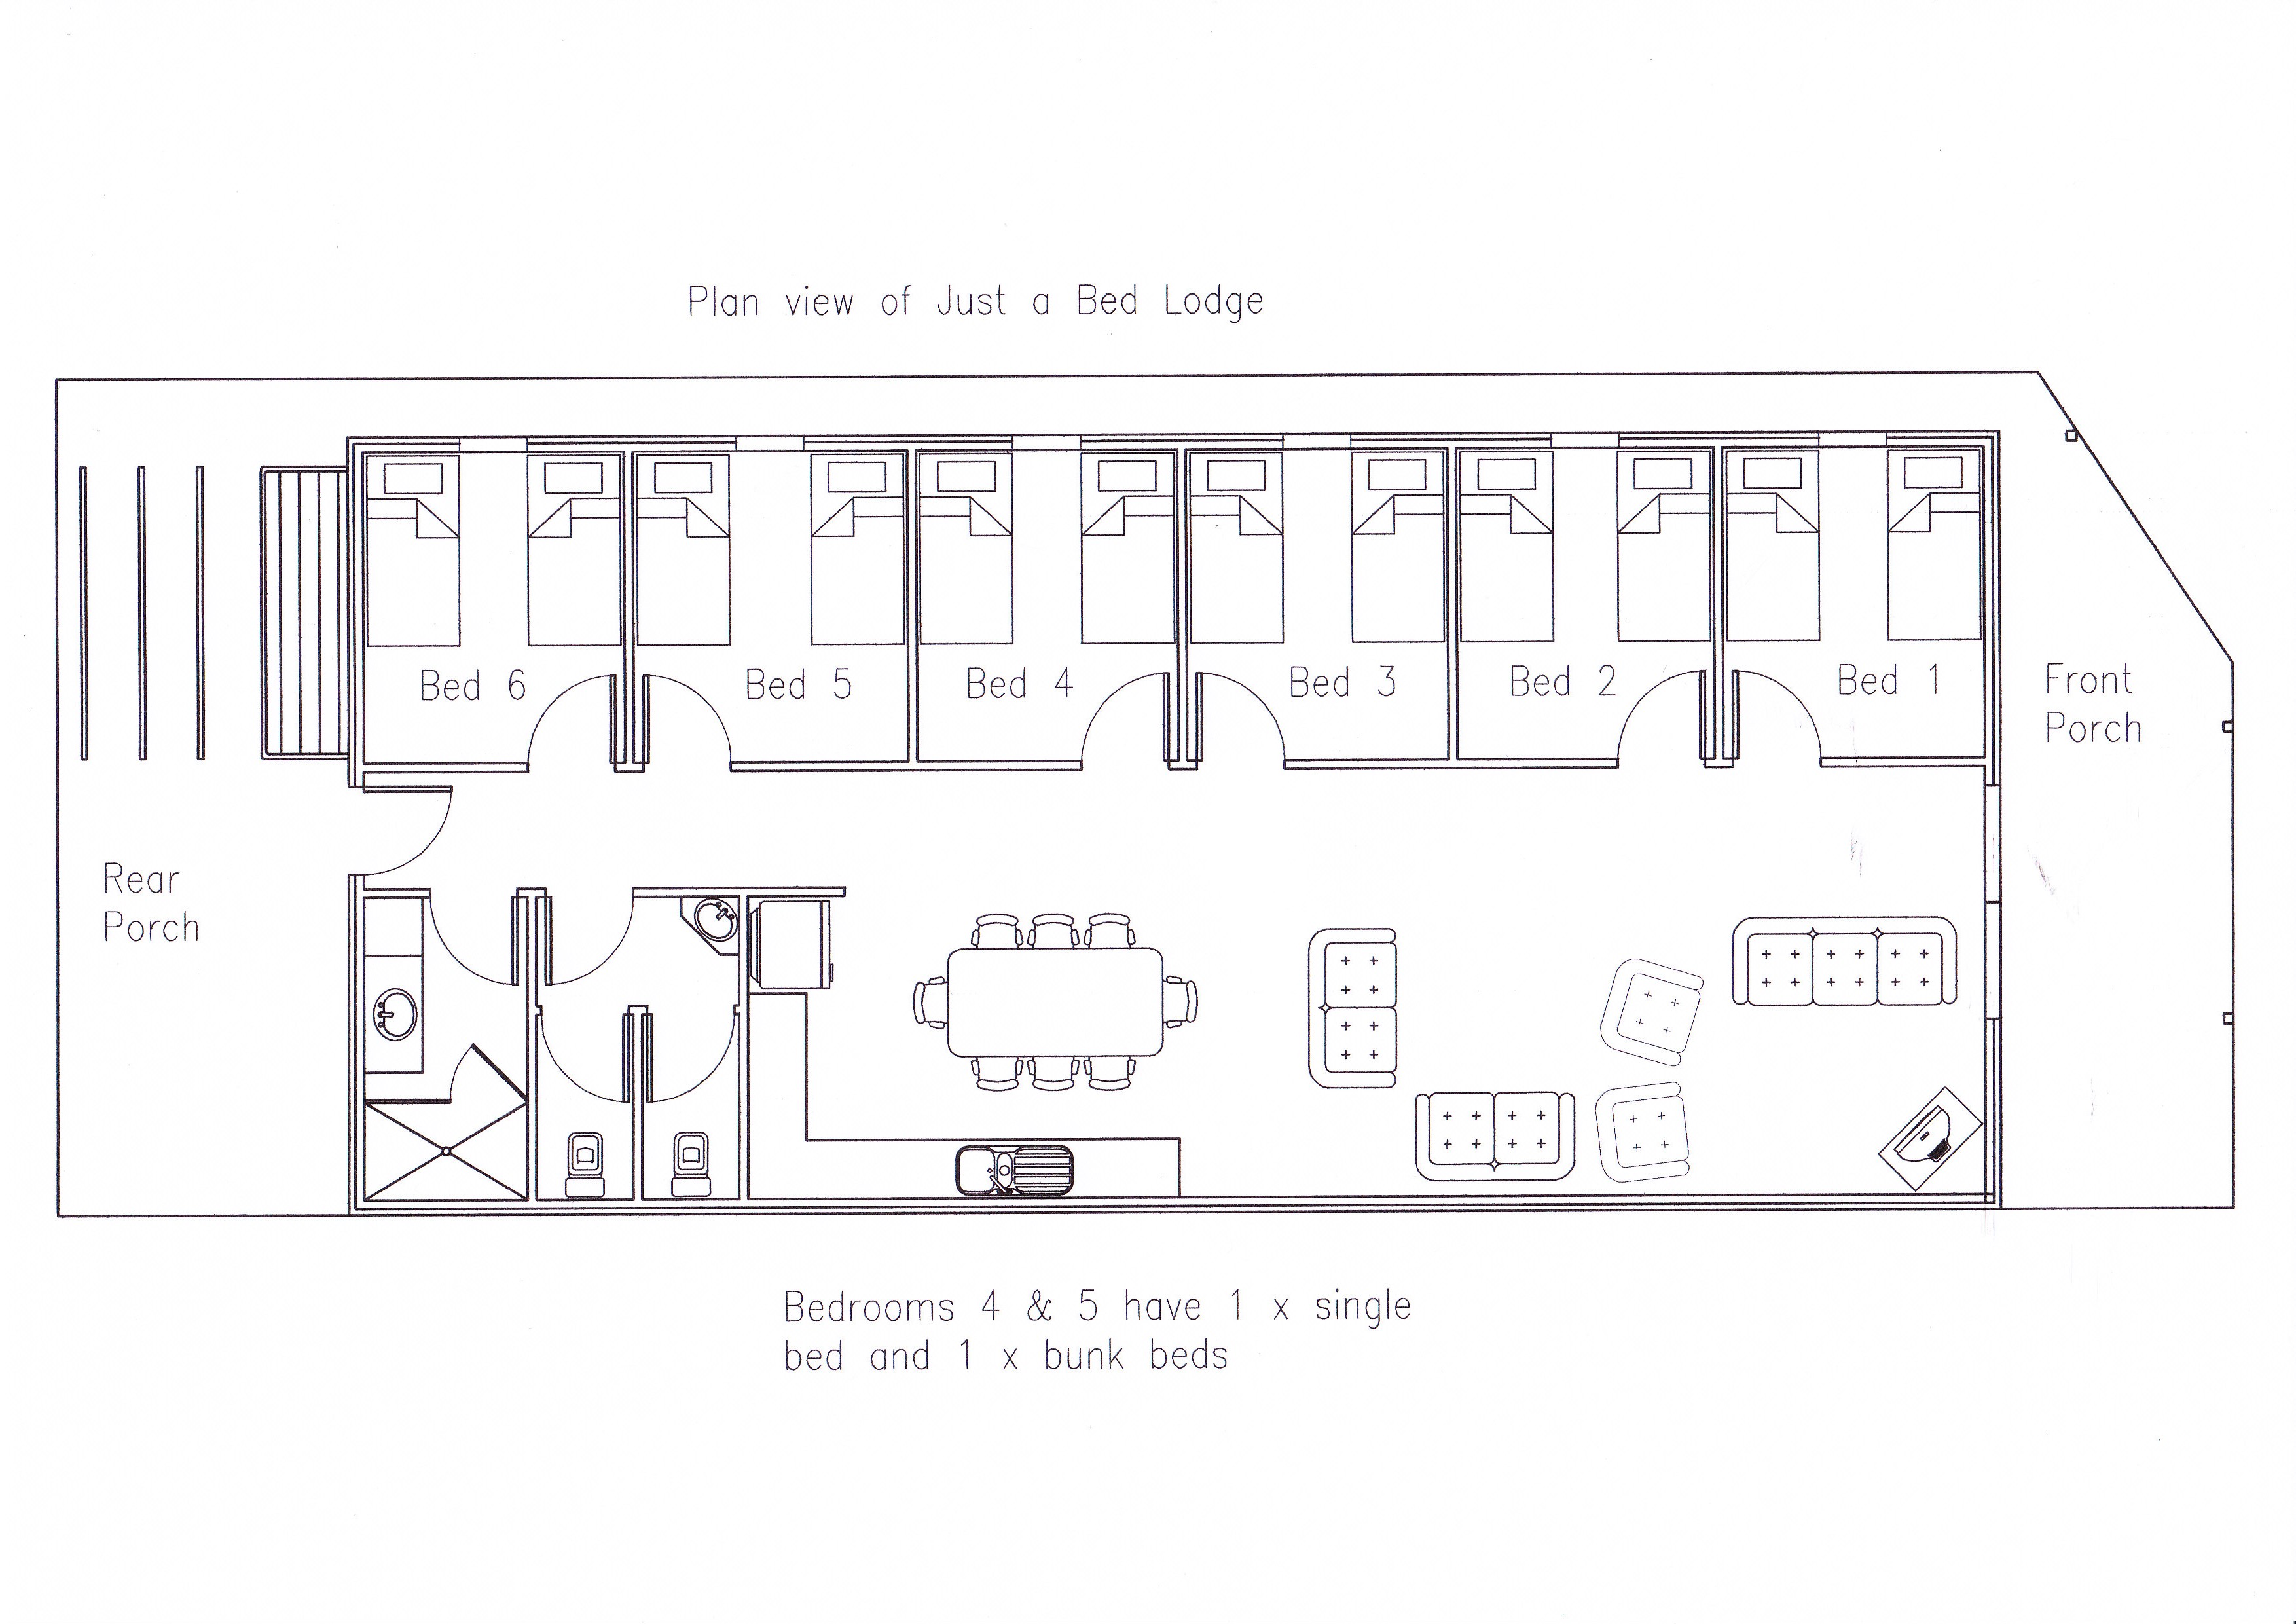 Plan of Just a Bed Lodge